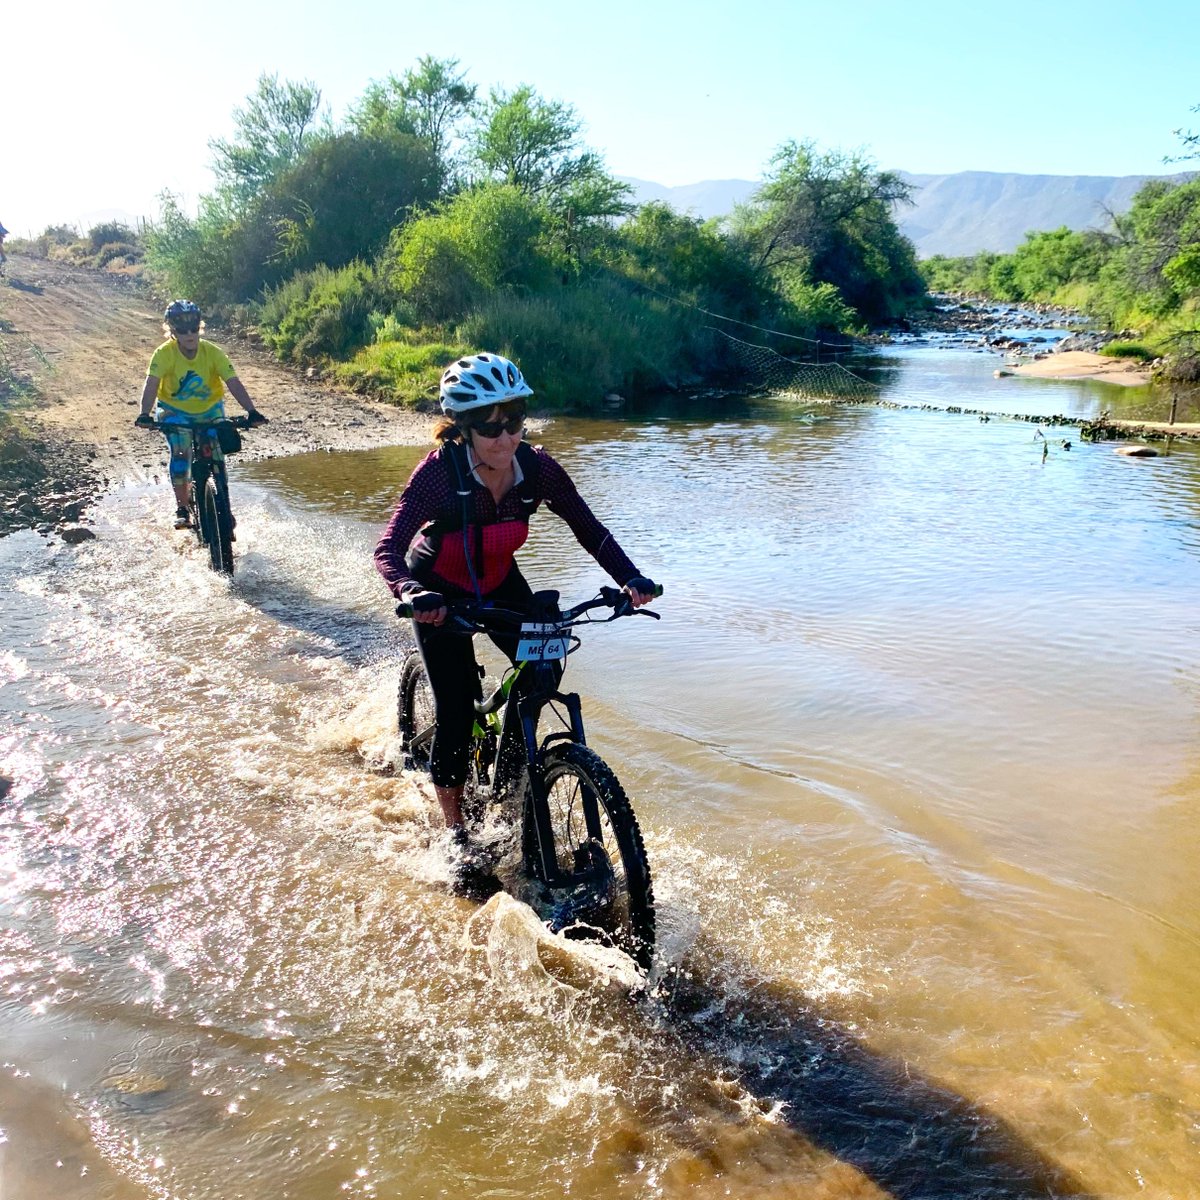 We had a fantastic group with us over the weekend. It was a green Karoo for a change with uncharacteristic river crossings. Great fun had by all. .
#karoogravelgrinder
#cycletouring #adventurecycling
#biketouring #worldbybike #biketour #rideyourbike